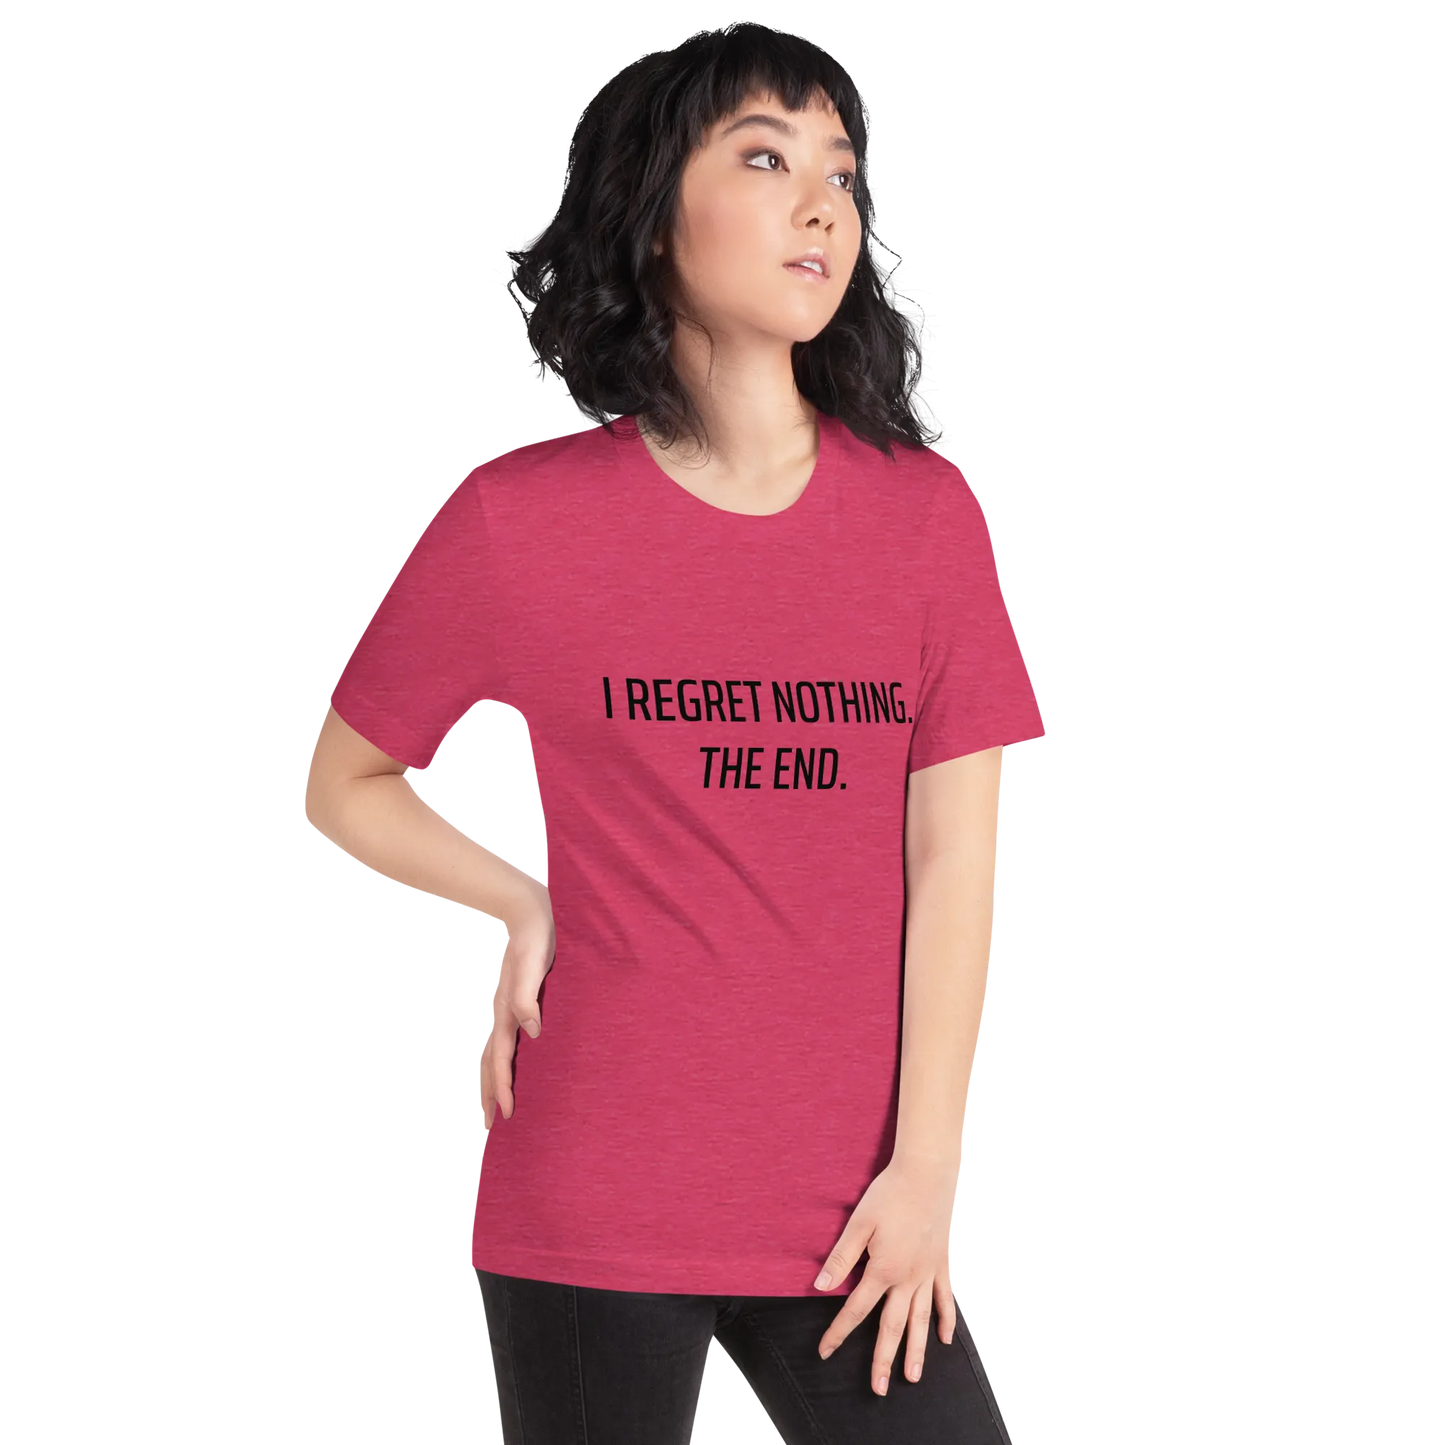 I Regret Nothing Tee in Heather Raspberry on woman left